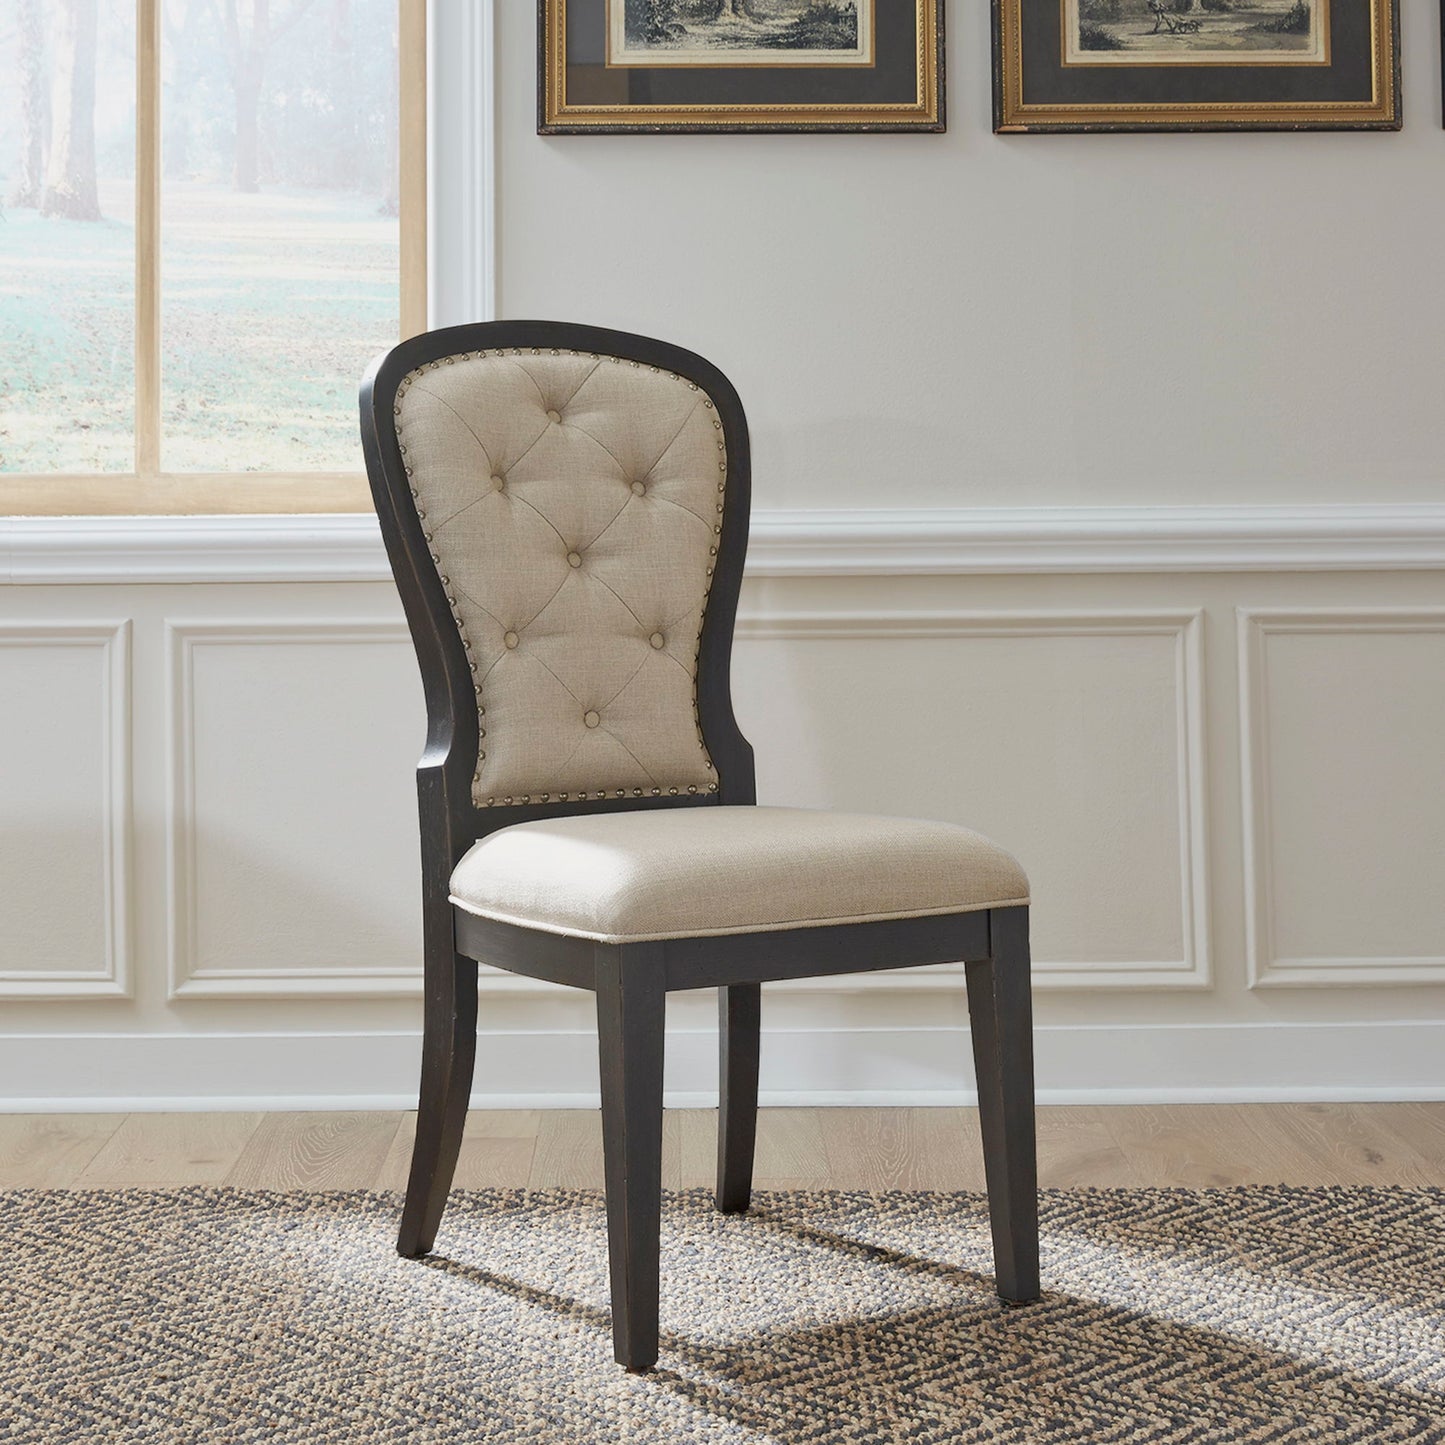 Americana Farmhouse - Upholstered Tufted Back Side Chair - Black